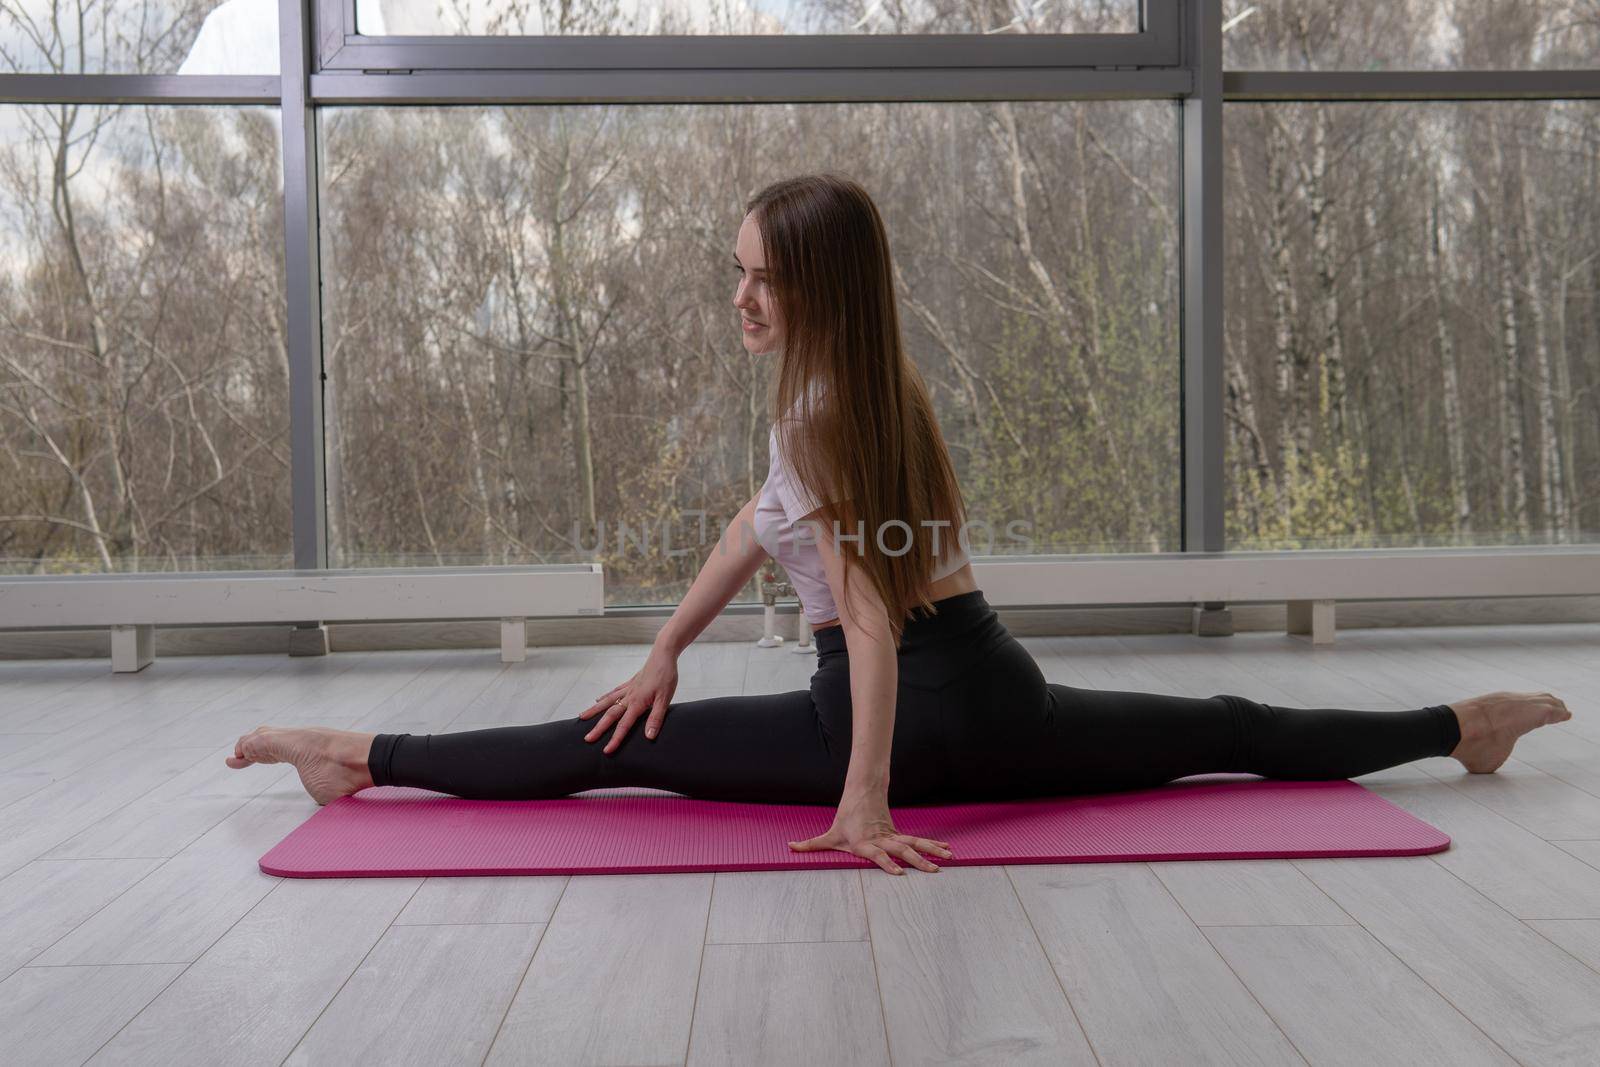 Smiling gymnast the in A twine fitness. Sits red mfr strength, from fit class for female for yoga workout, floor sporty. Plank copy gym, technology practicing pose by 89167702191